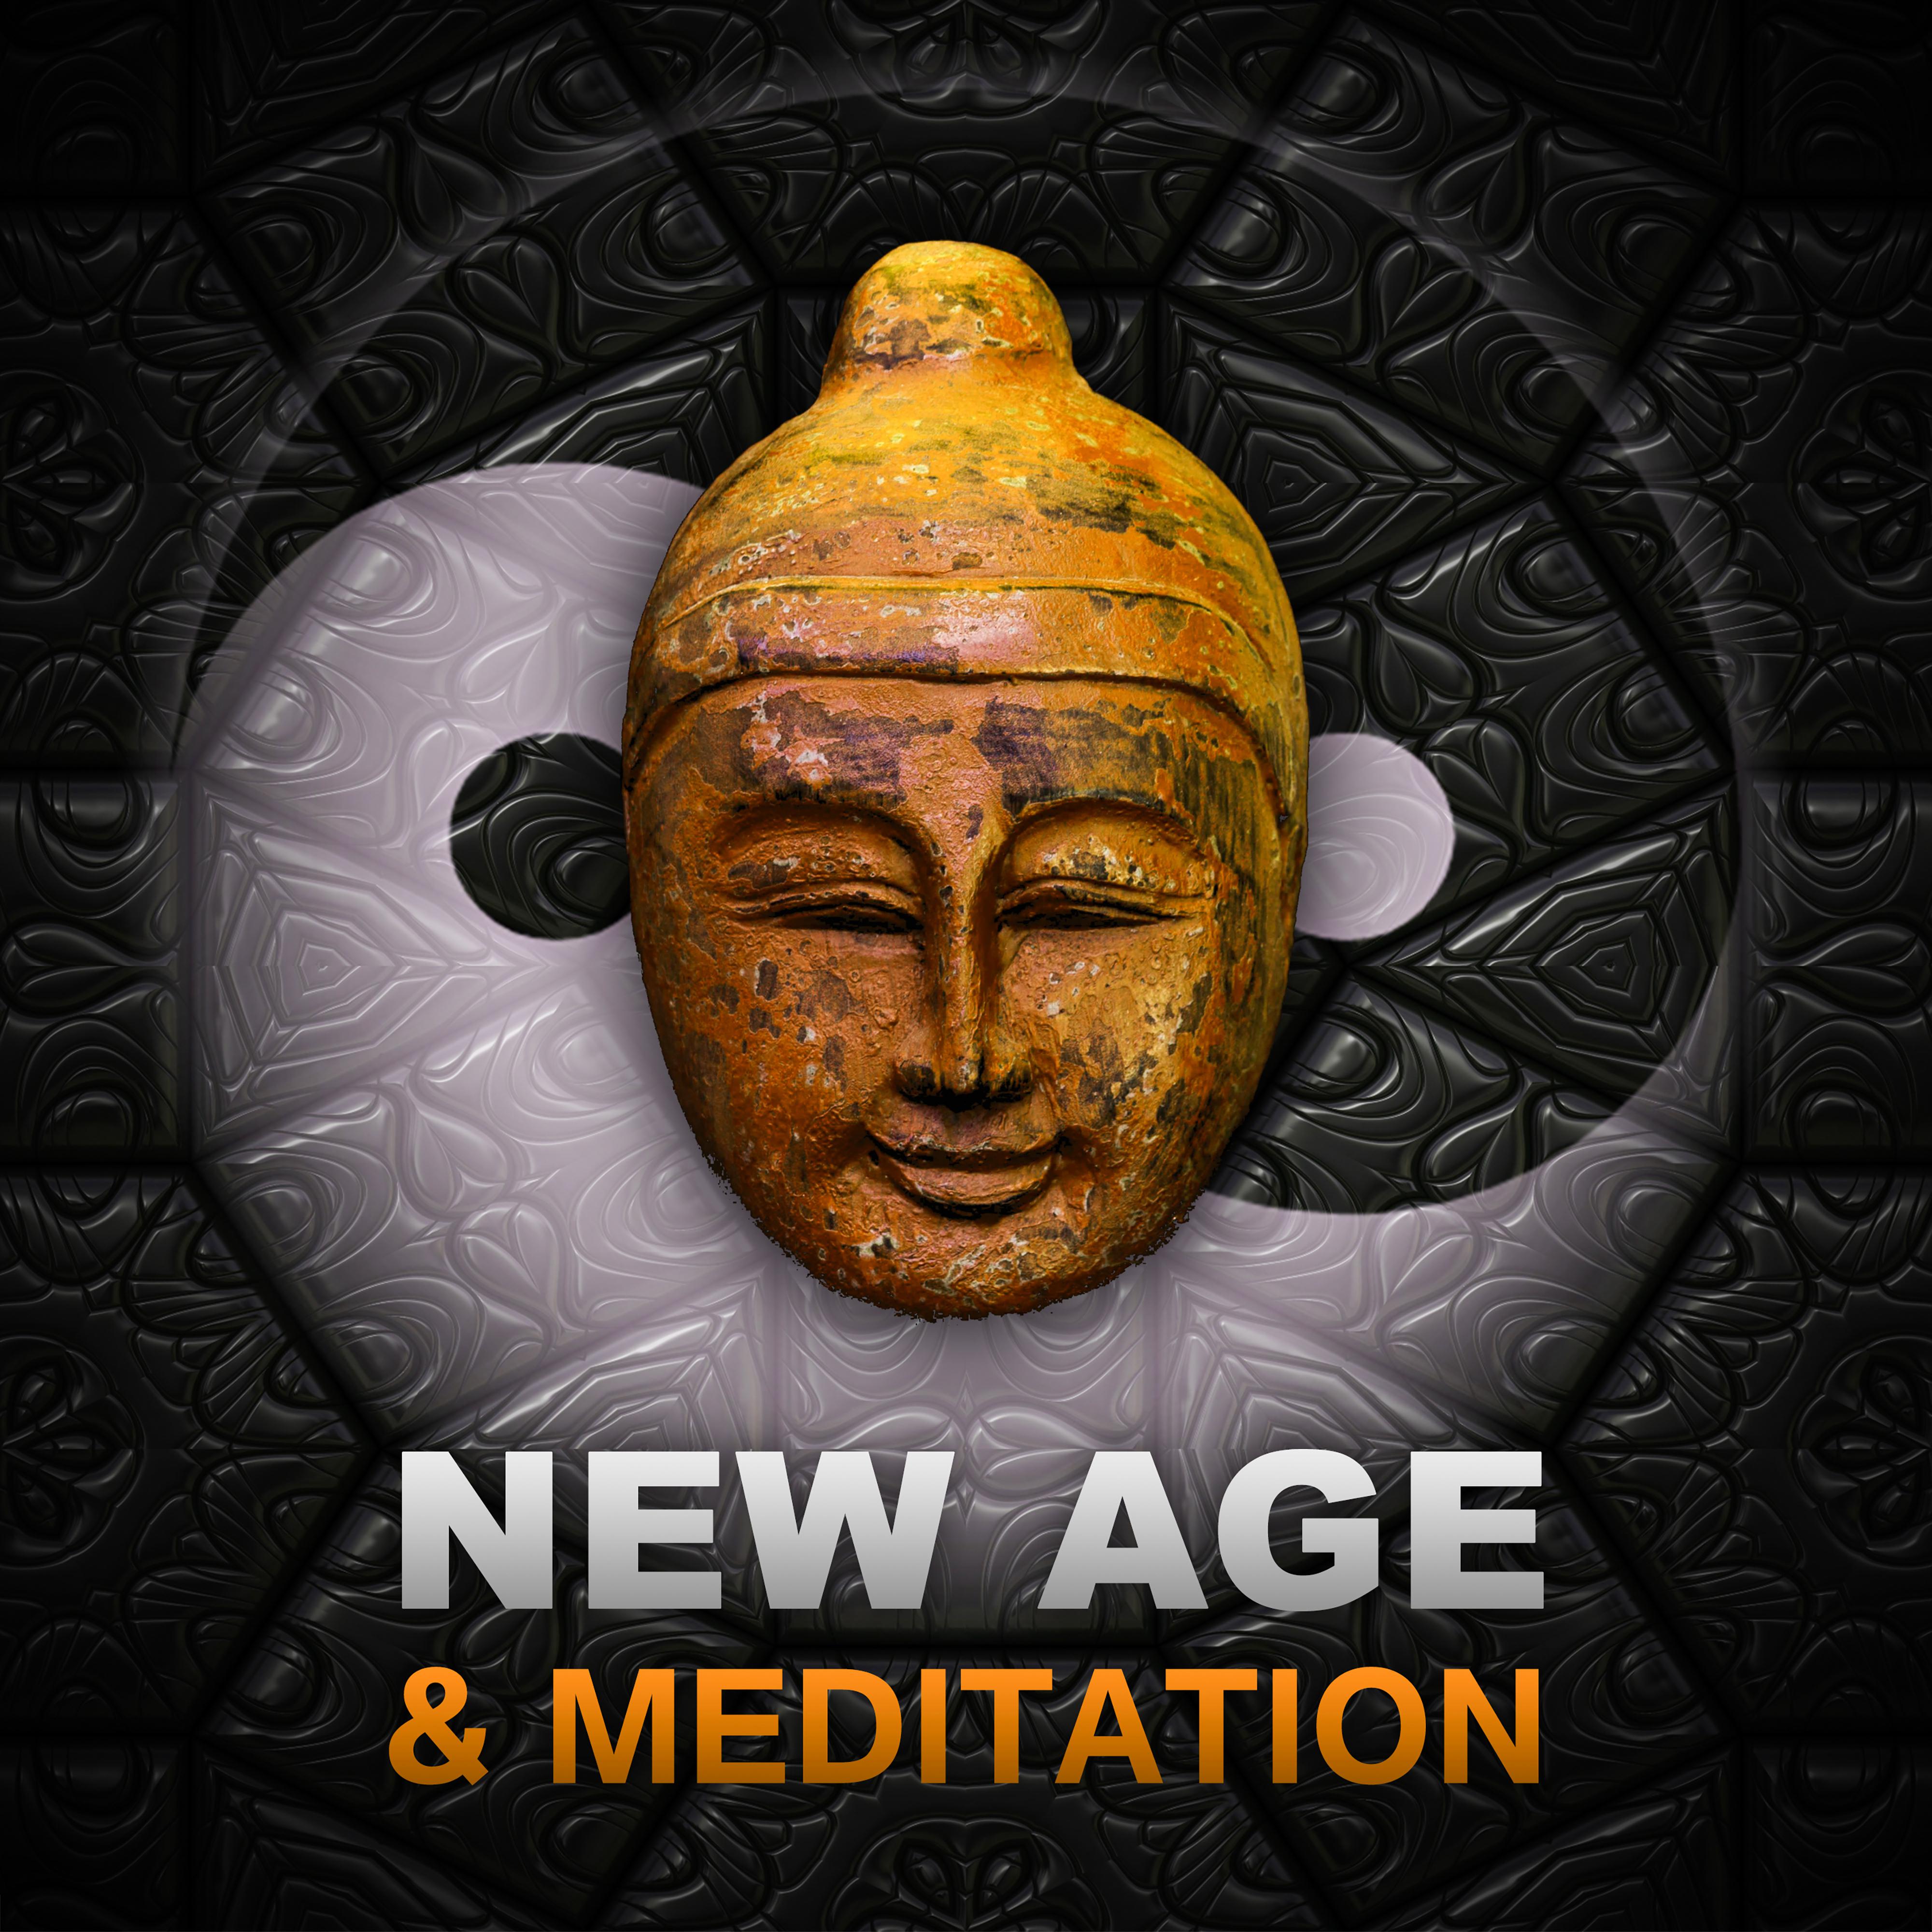 New Age  Meditation  Calming Sounds of Nature for Meditation, Relaxation, Yoga, Pilates, Contemplation